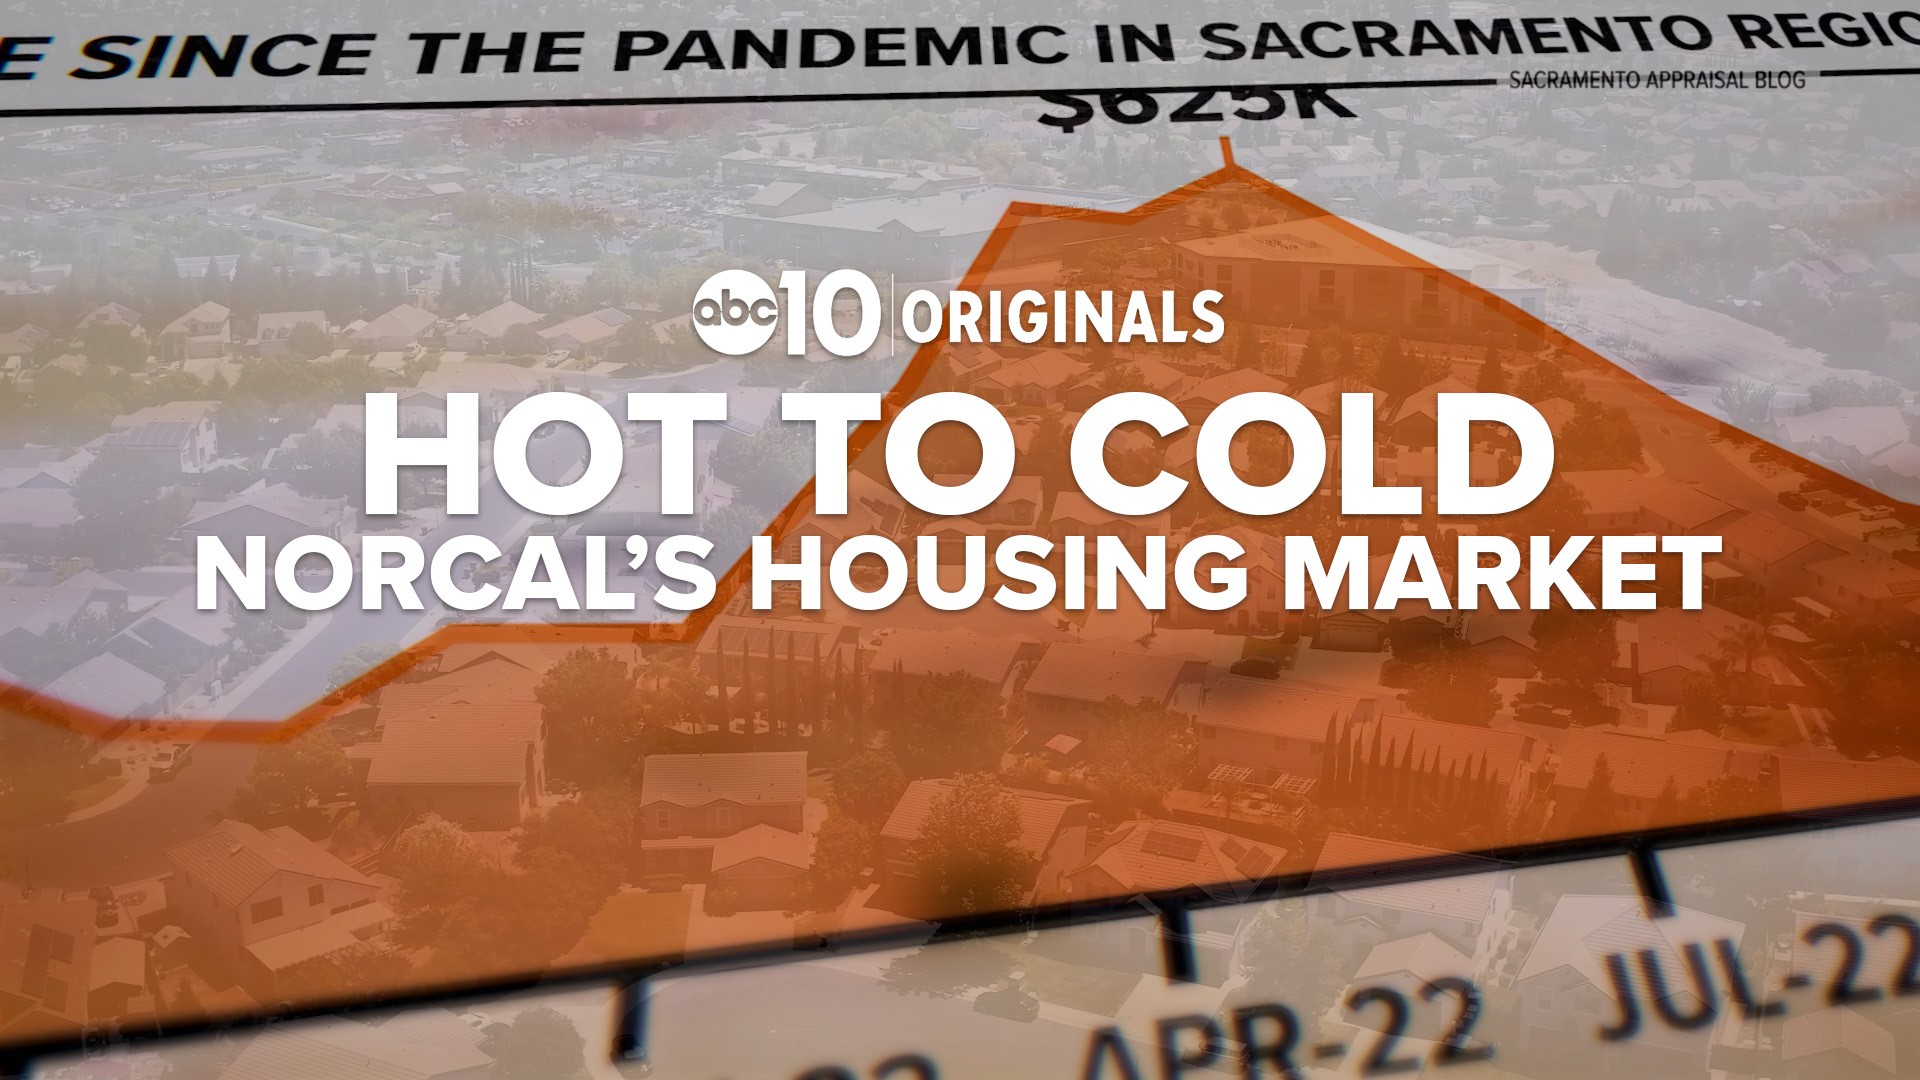 From a red hot market to a major slow down, the Sacramento region's housing market and all involved have buckled in for a wild ride from pre to post-pandemic.